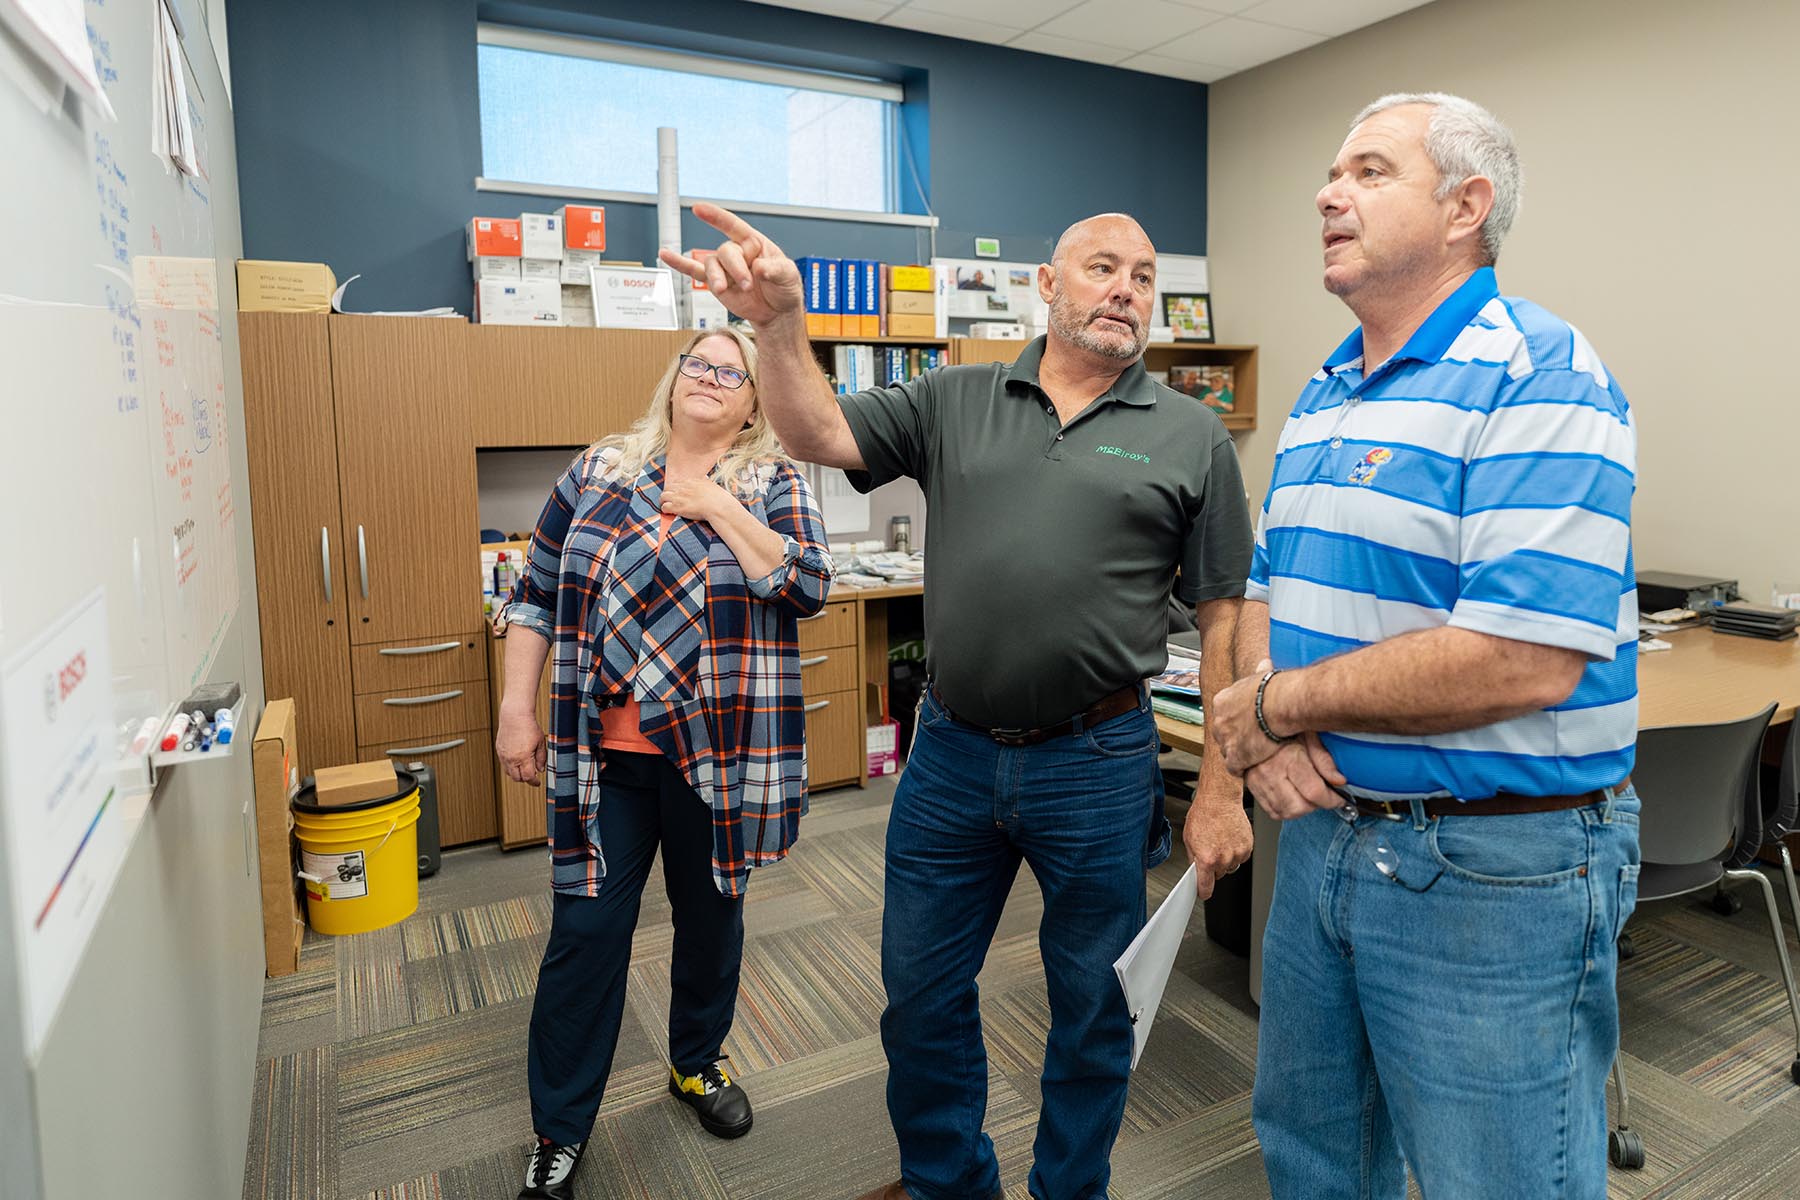 Julie Schirmer, McElroy’s residential HVAC service rep, Greg Hunsicker and Haig Sarkesian, McElroy’s residential HVAC sales, discuss current projects.